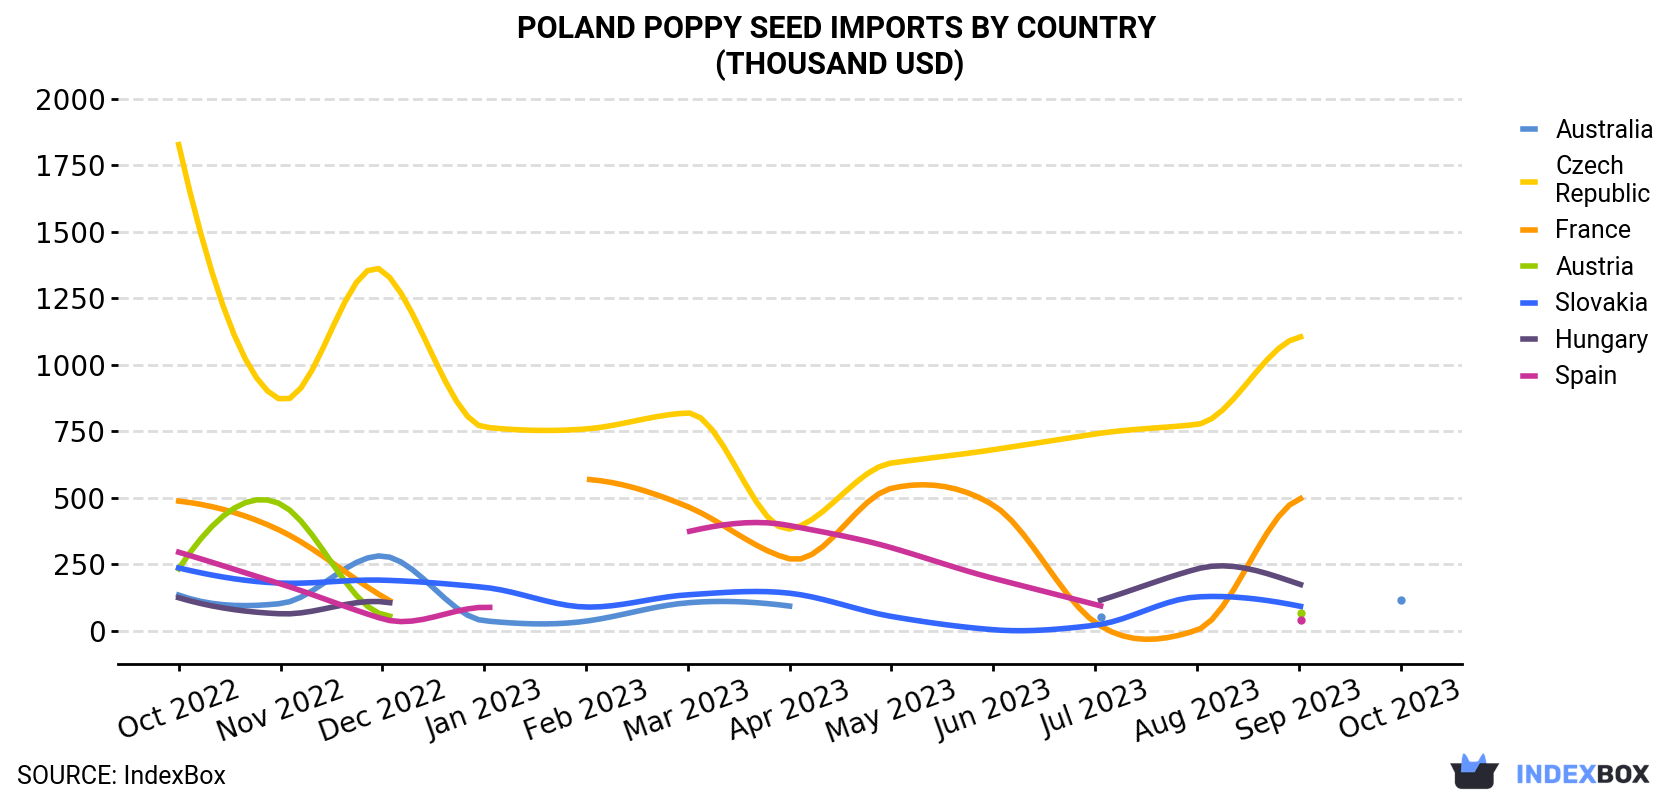 Poland Poppy Seed Imports By Country (Thousand USD)